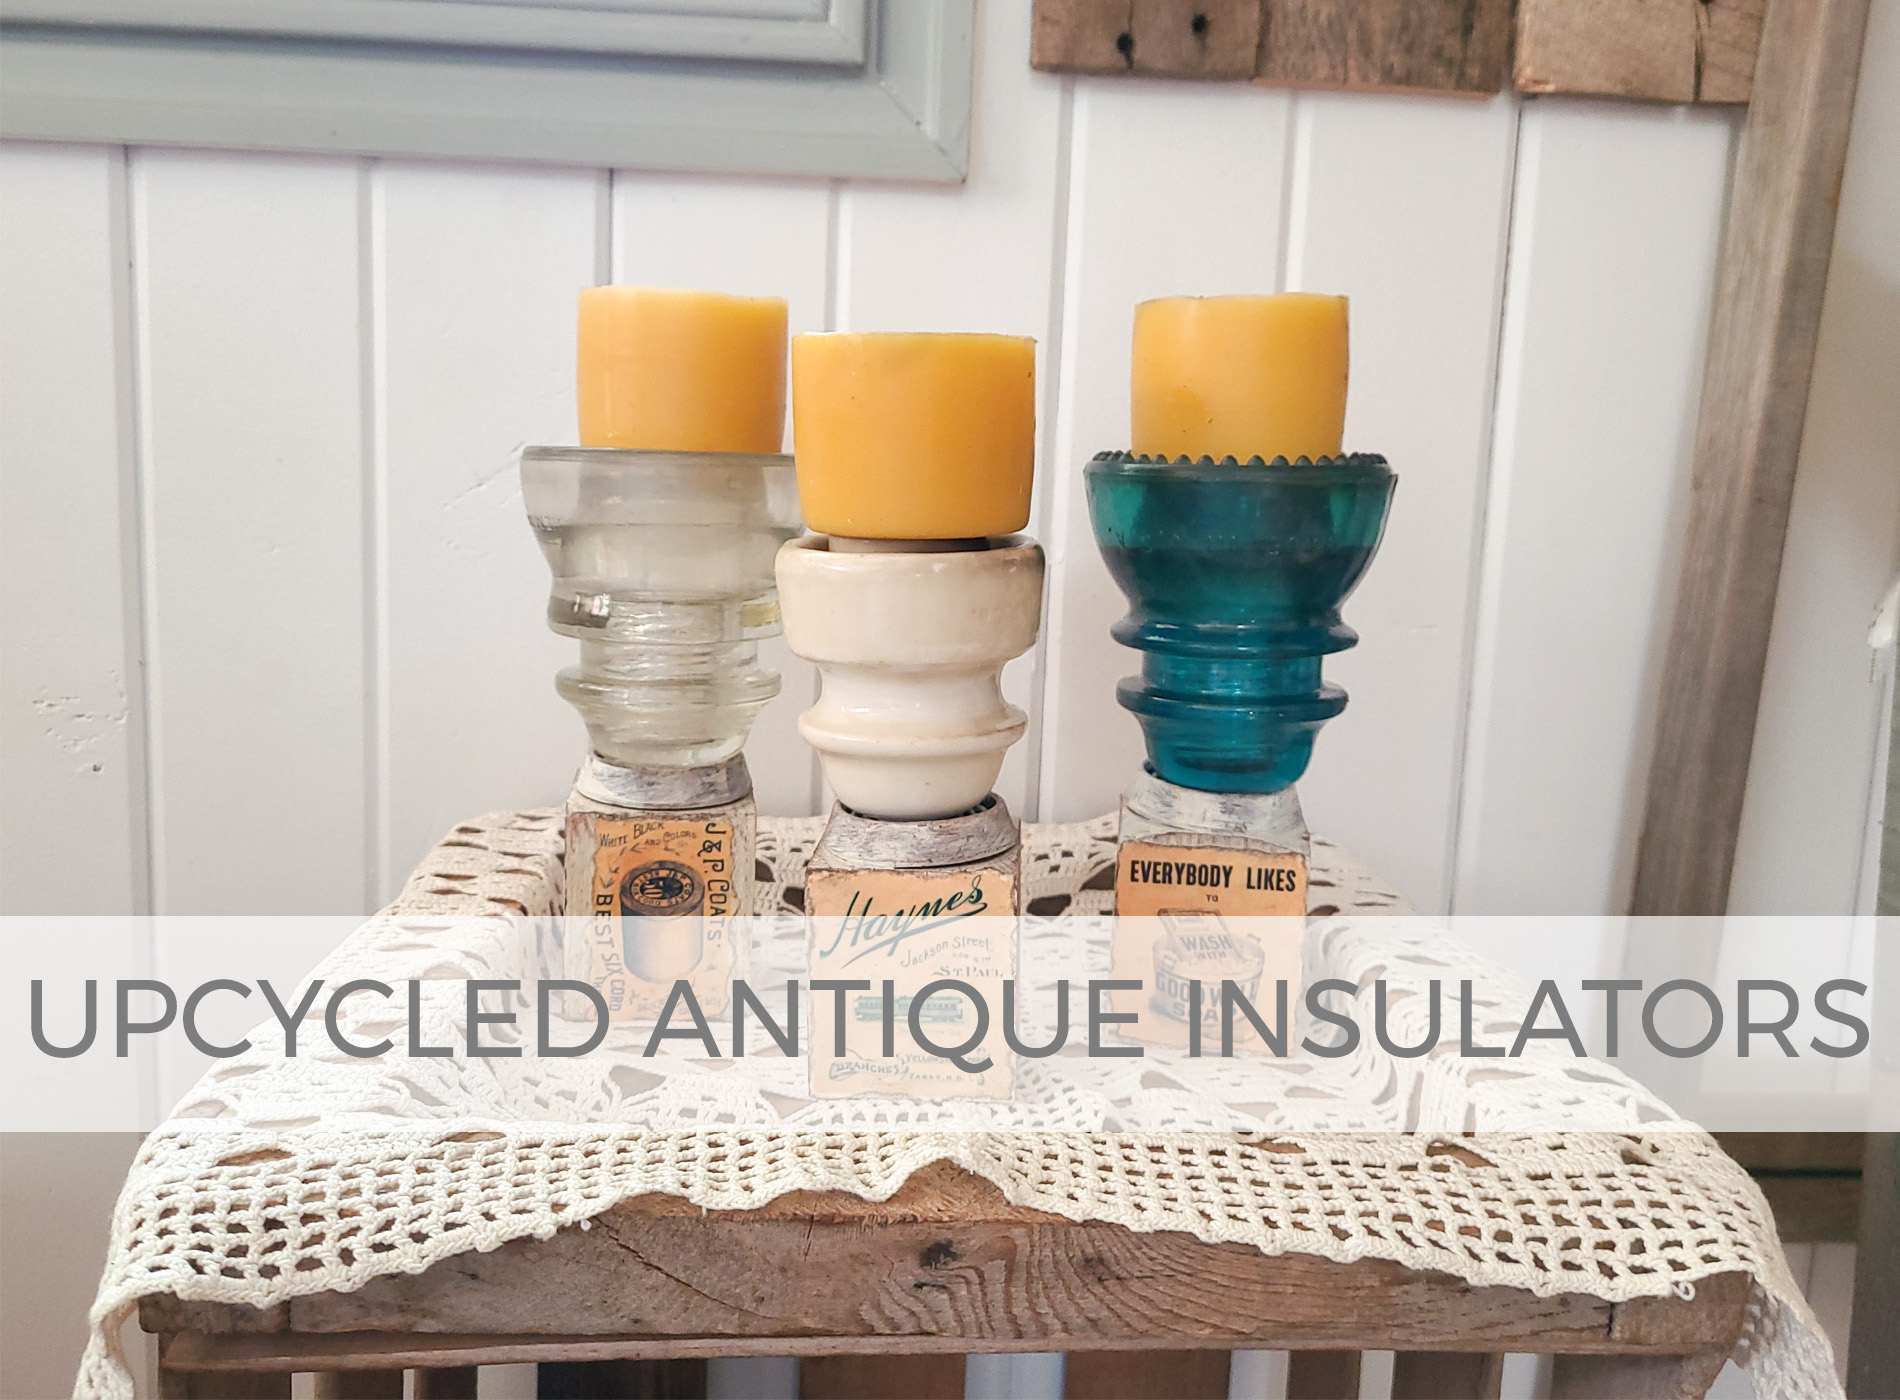 Upcycled Antique Insulators as Candle Holders by Larissa of Prodigal Pieces | prodigalpieces.com